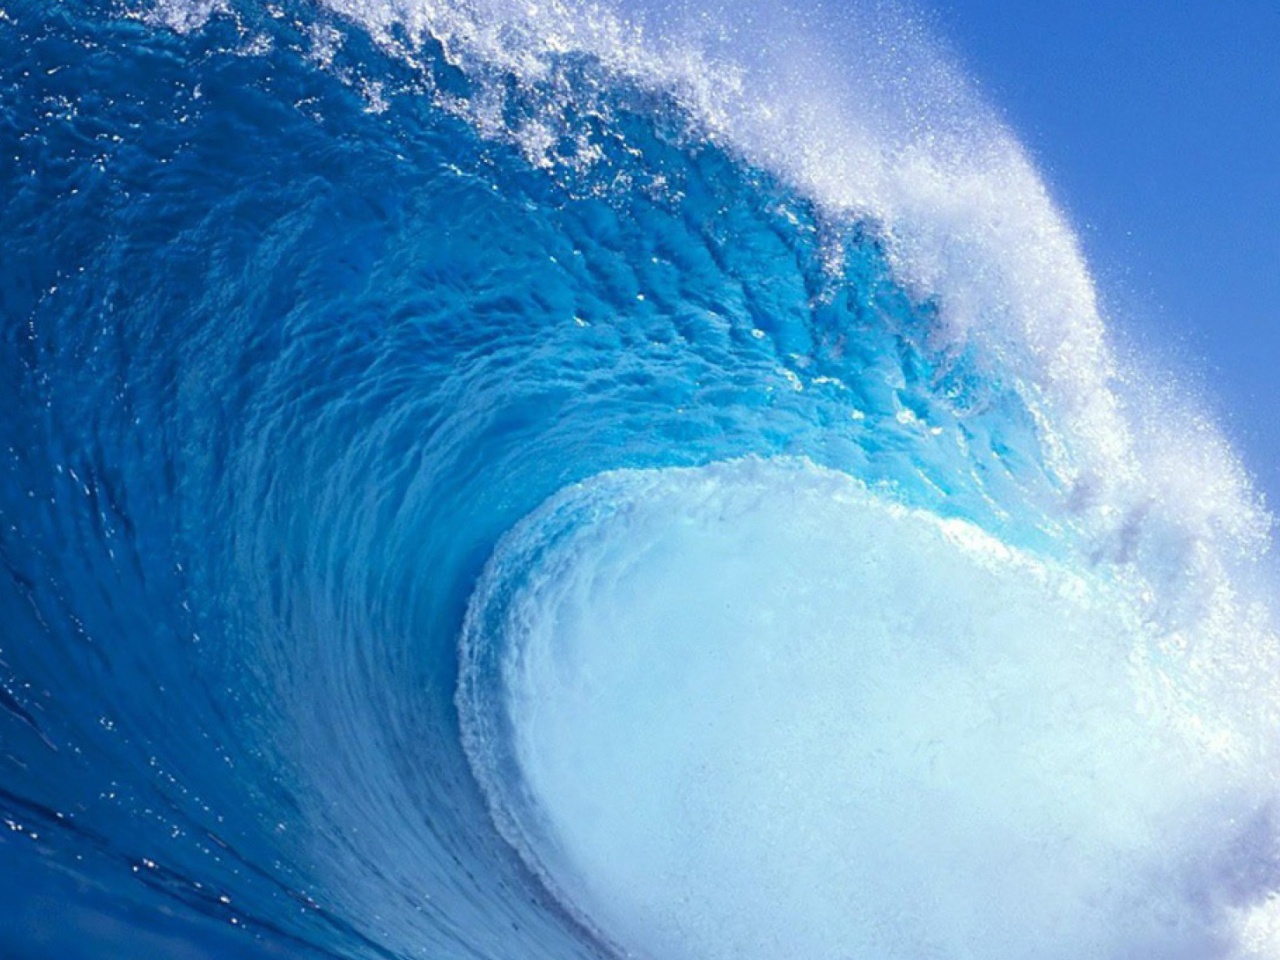 free 1280X960 Surf Wave 1280x960 wallpaper screensaver preview id